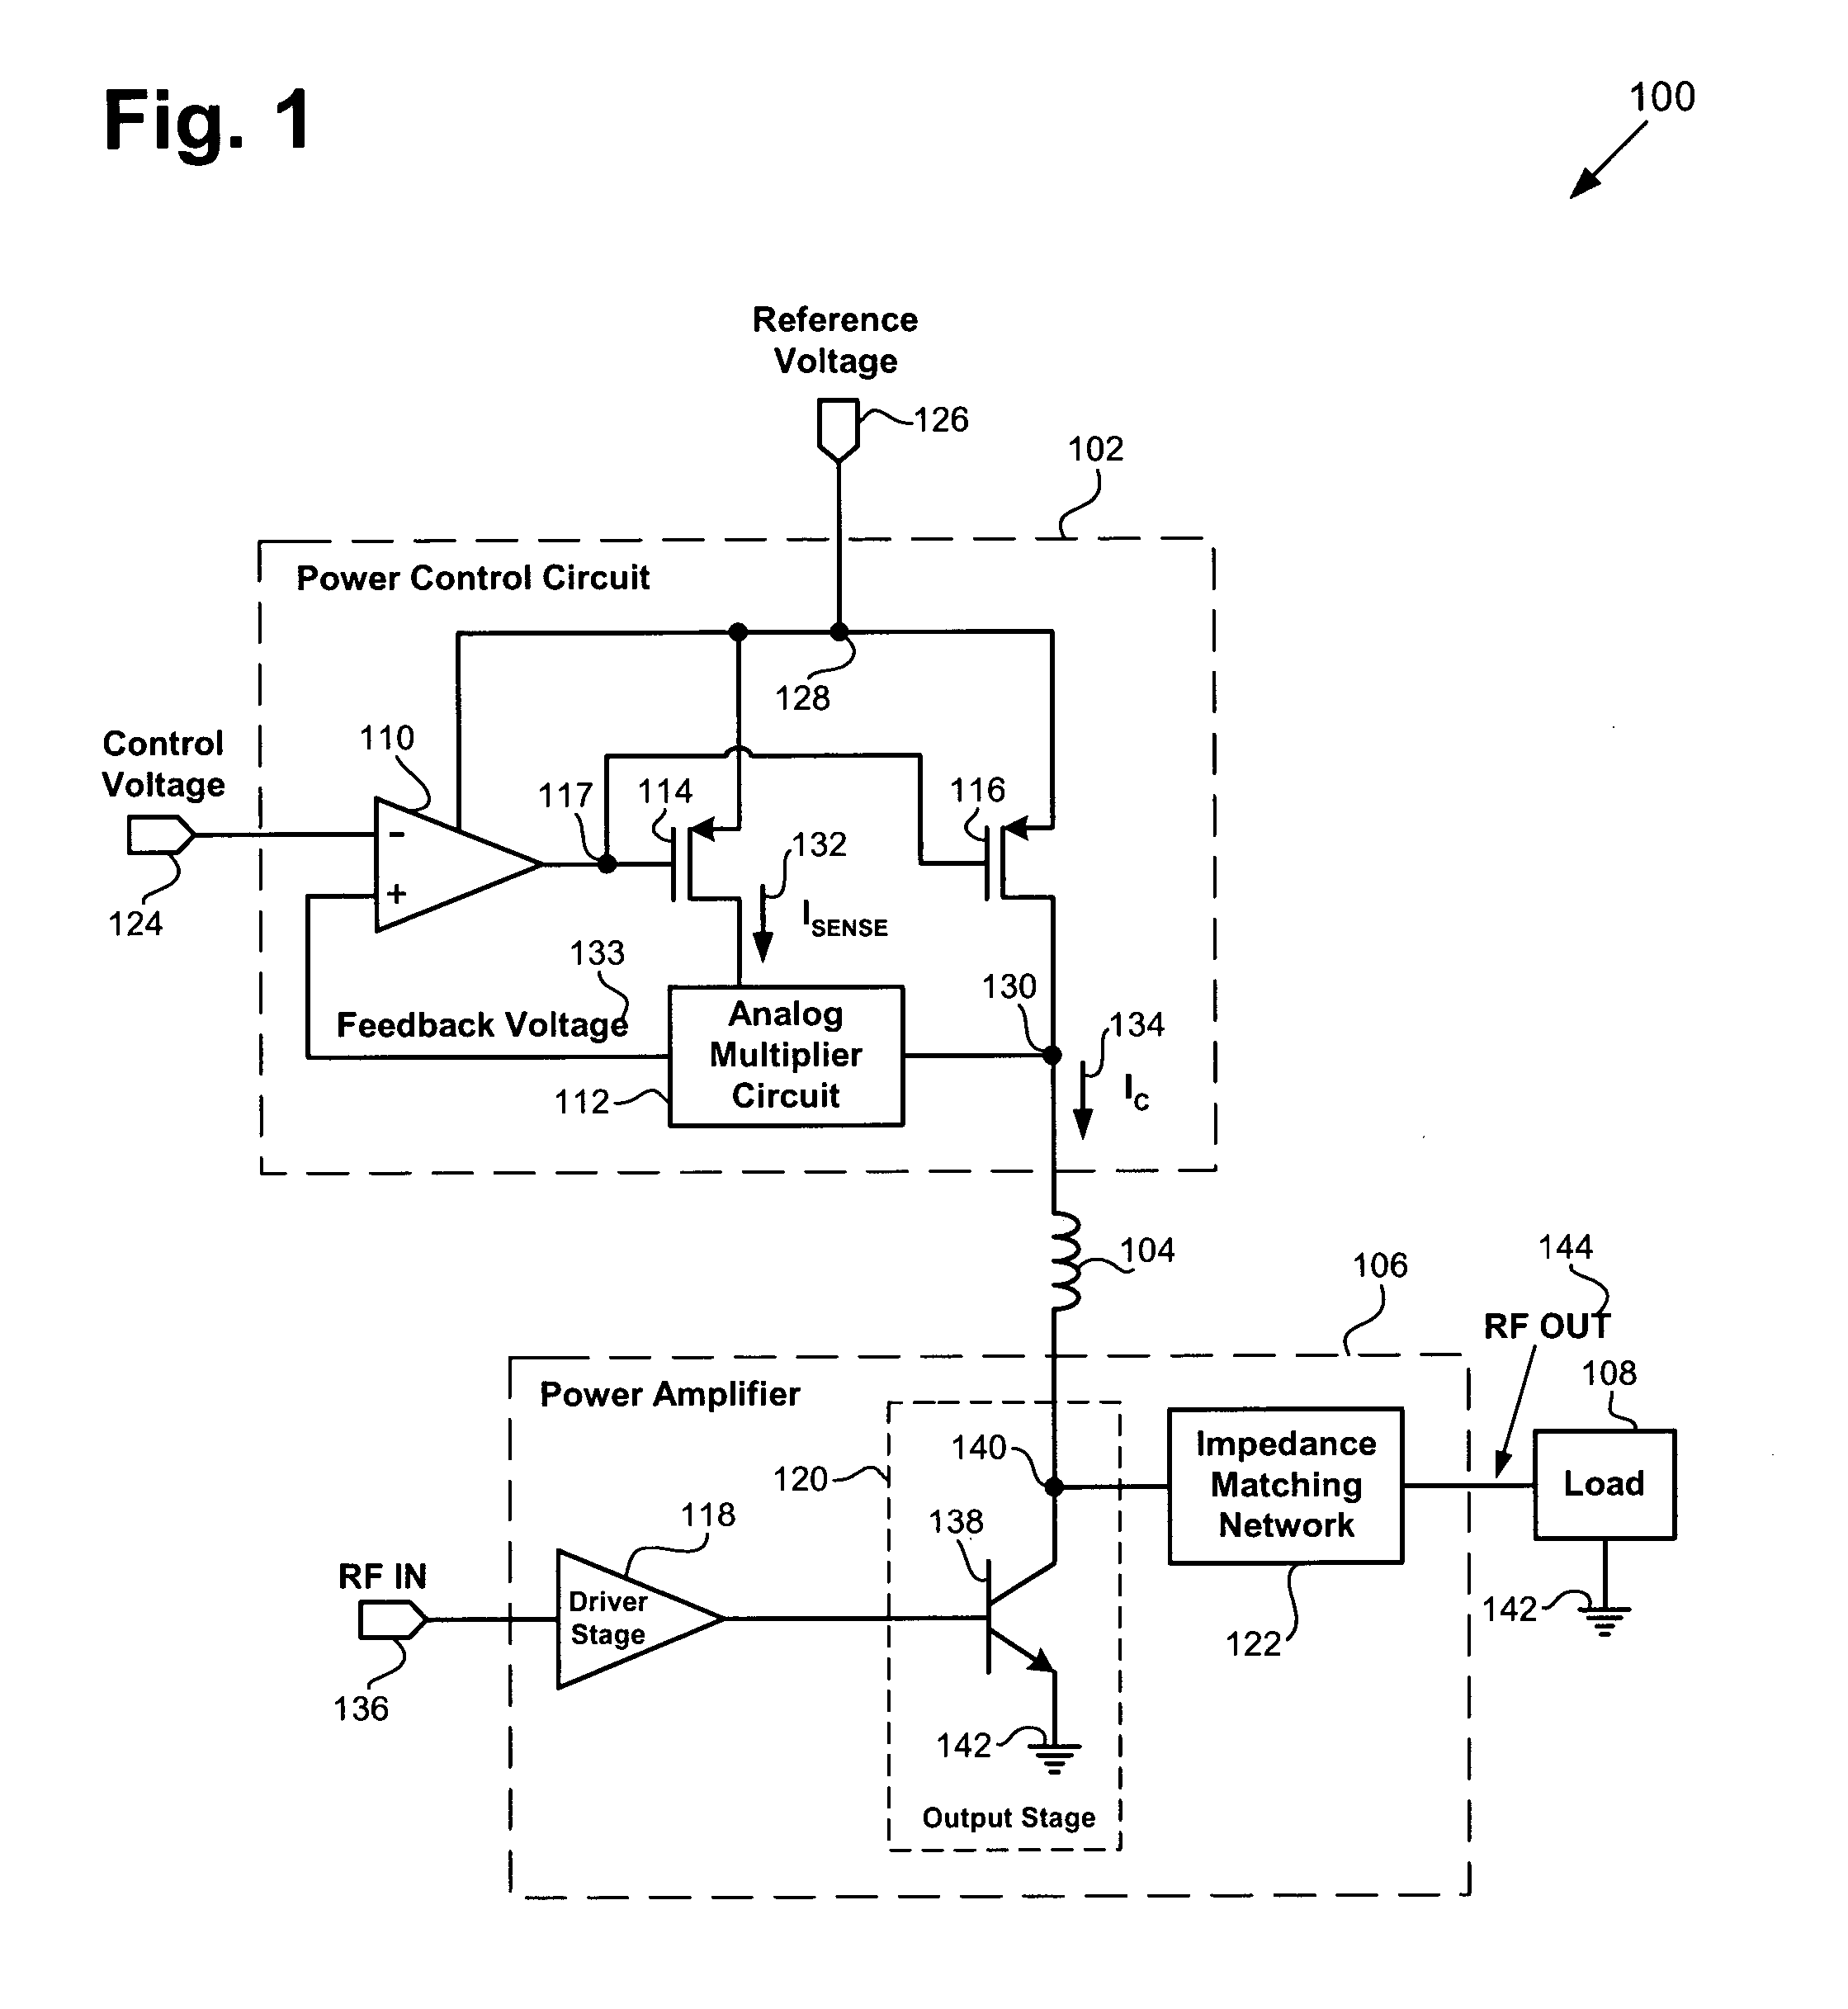 Power control circuit for accurate control of power amplifier output power